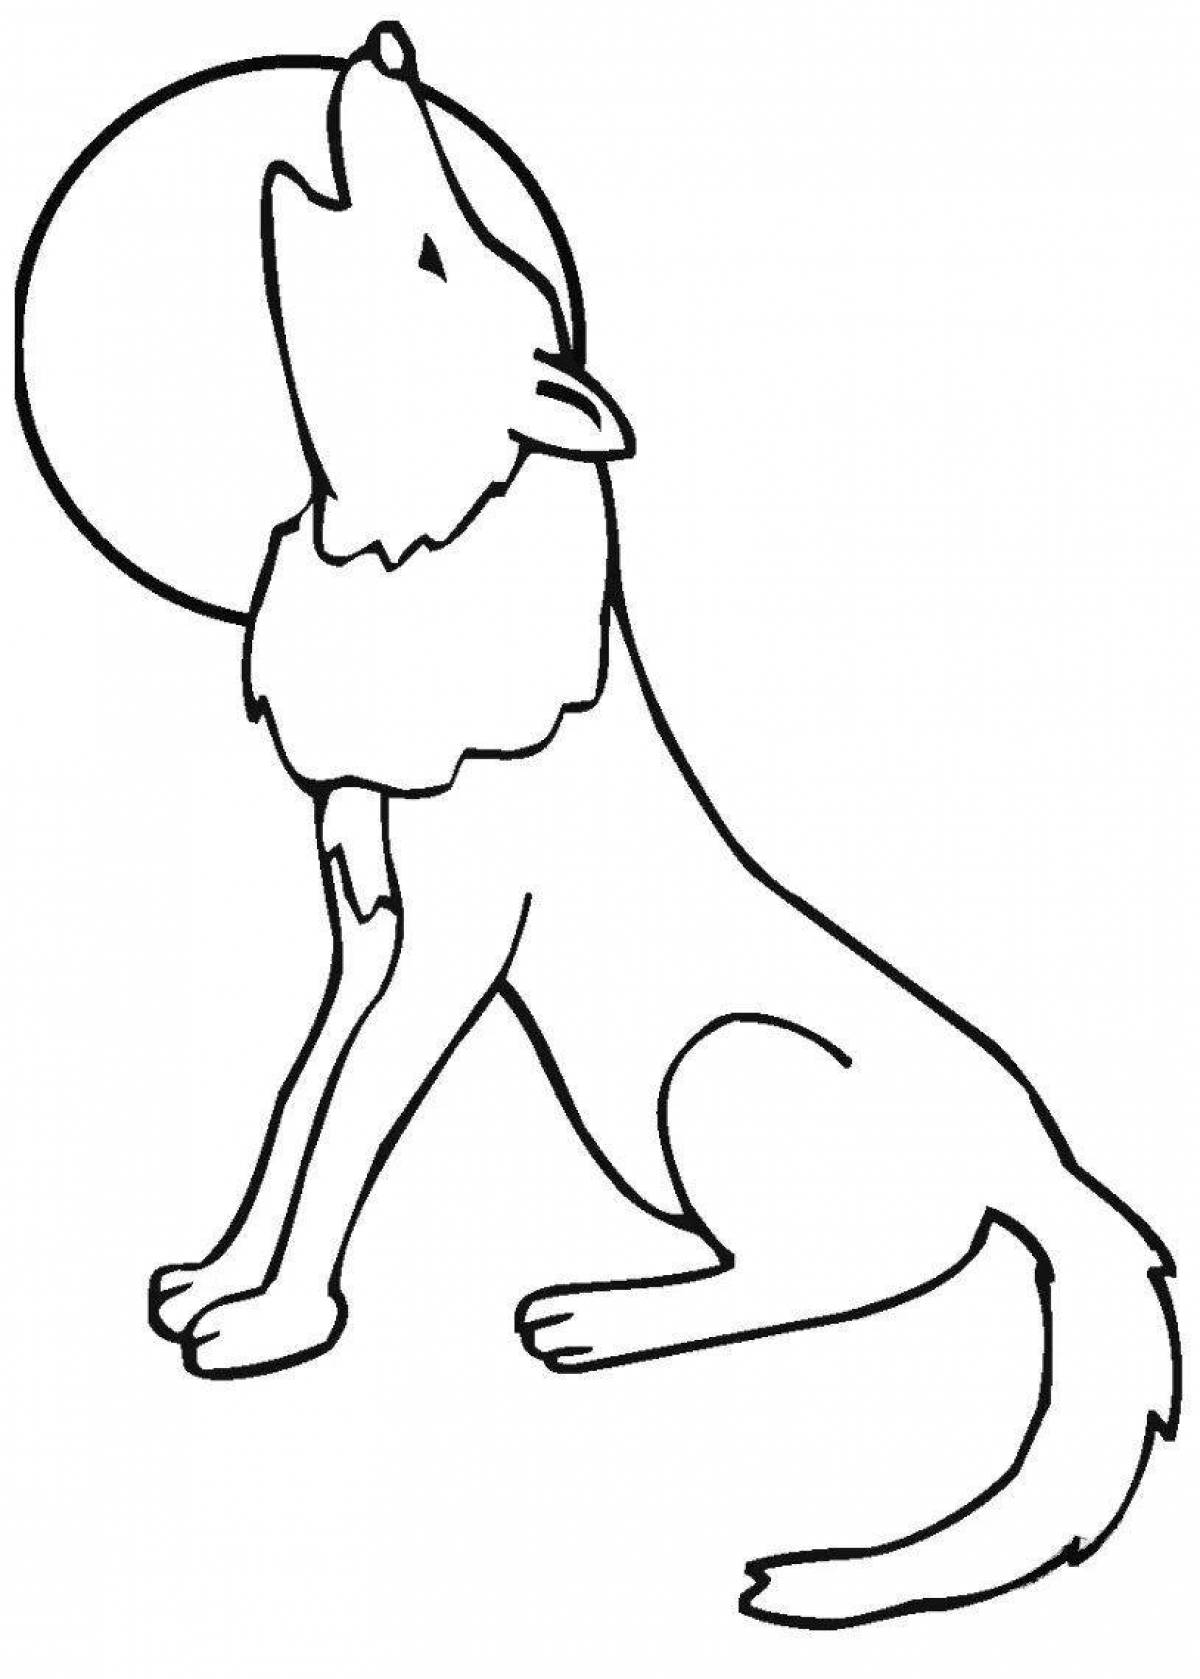 Coloring page serene wolf howling at the moon